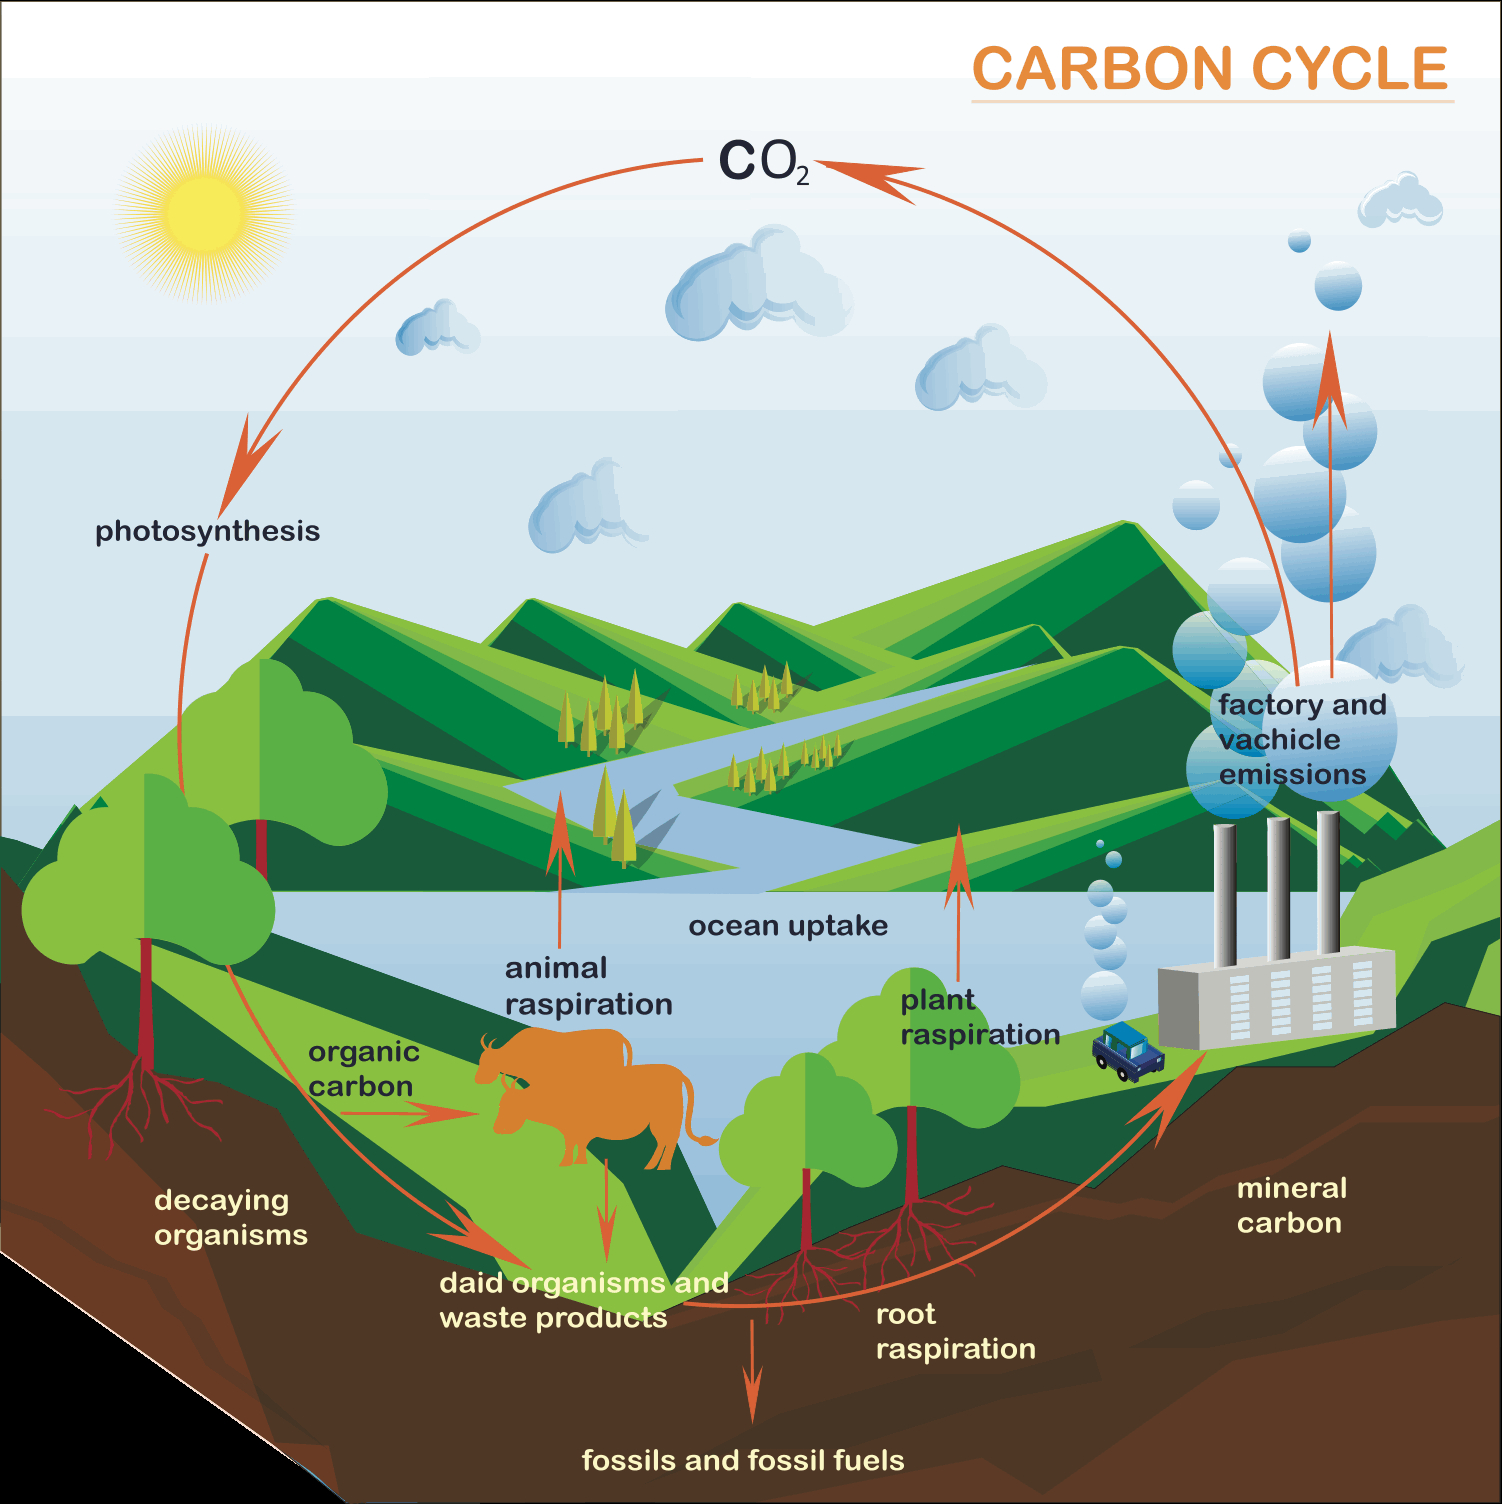 Carbon Cycle Diagram Processes And Pathways Of The Carbon Cycle A Level Geography